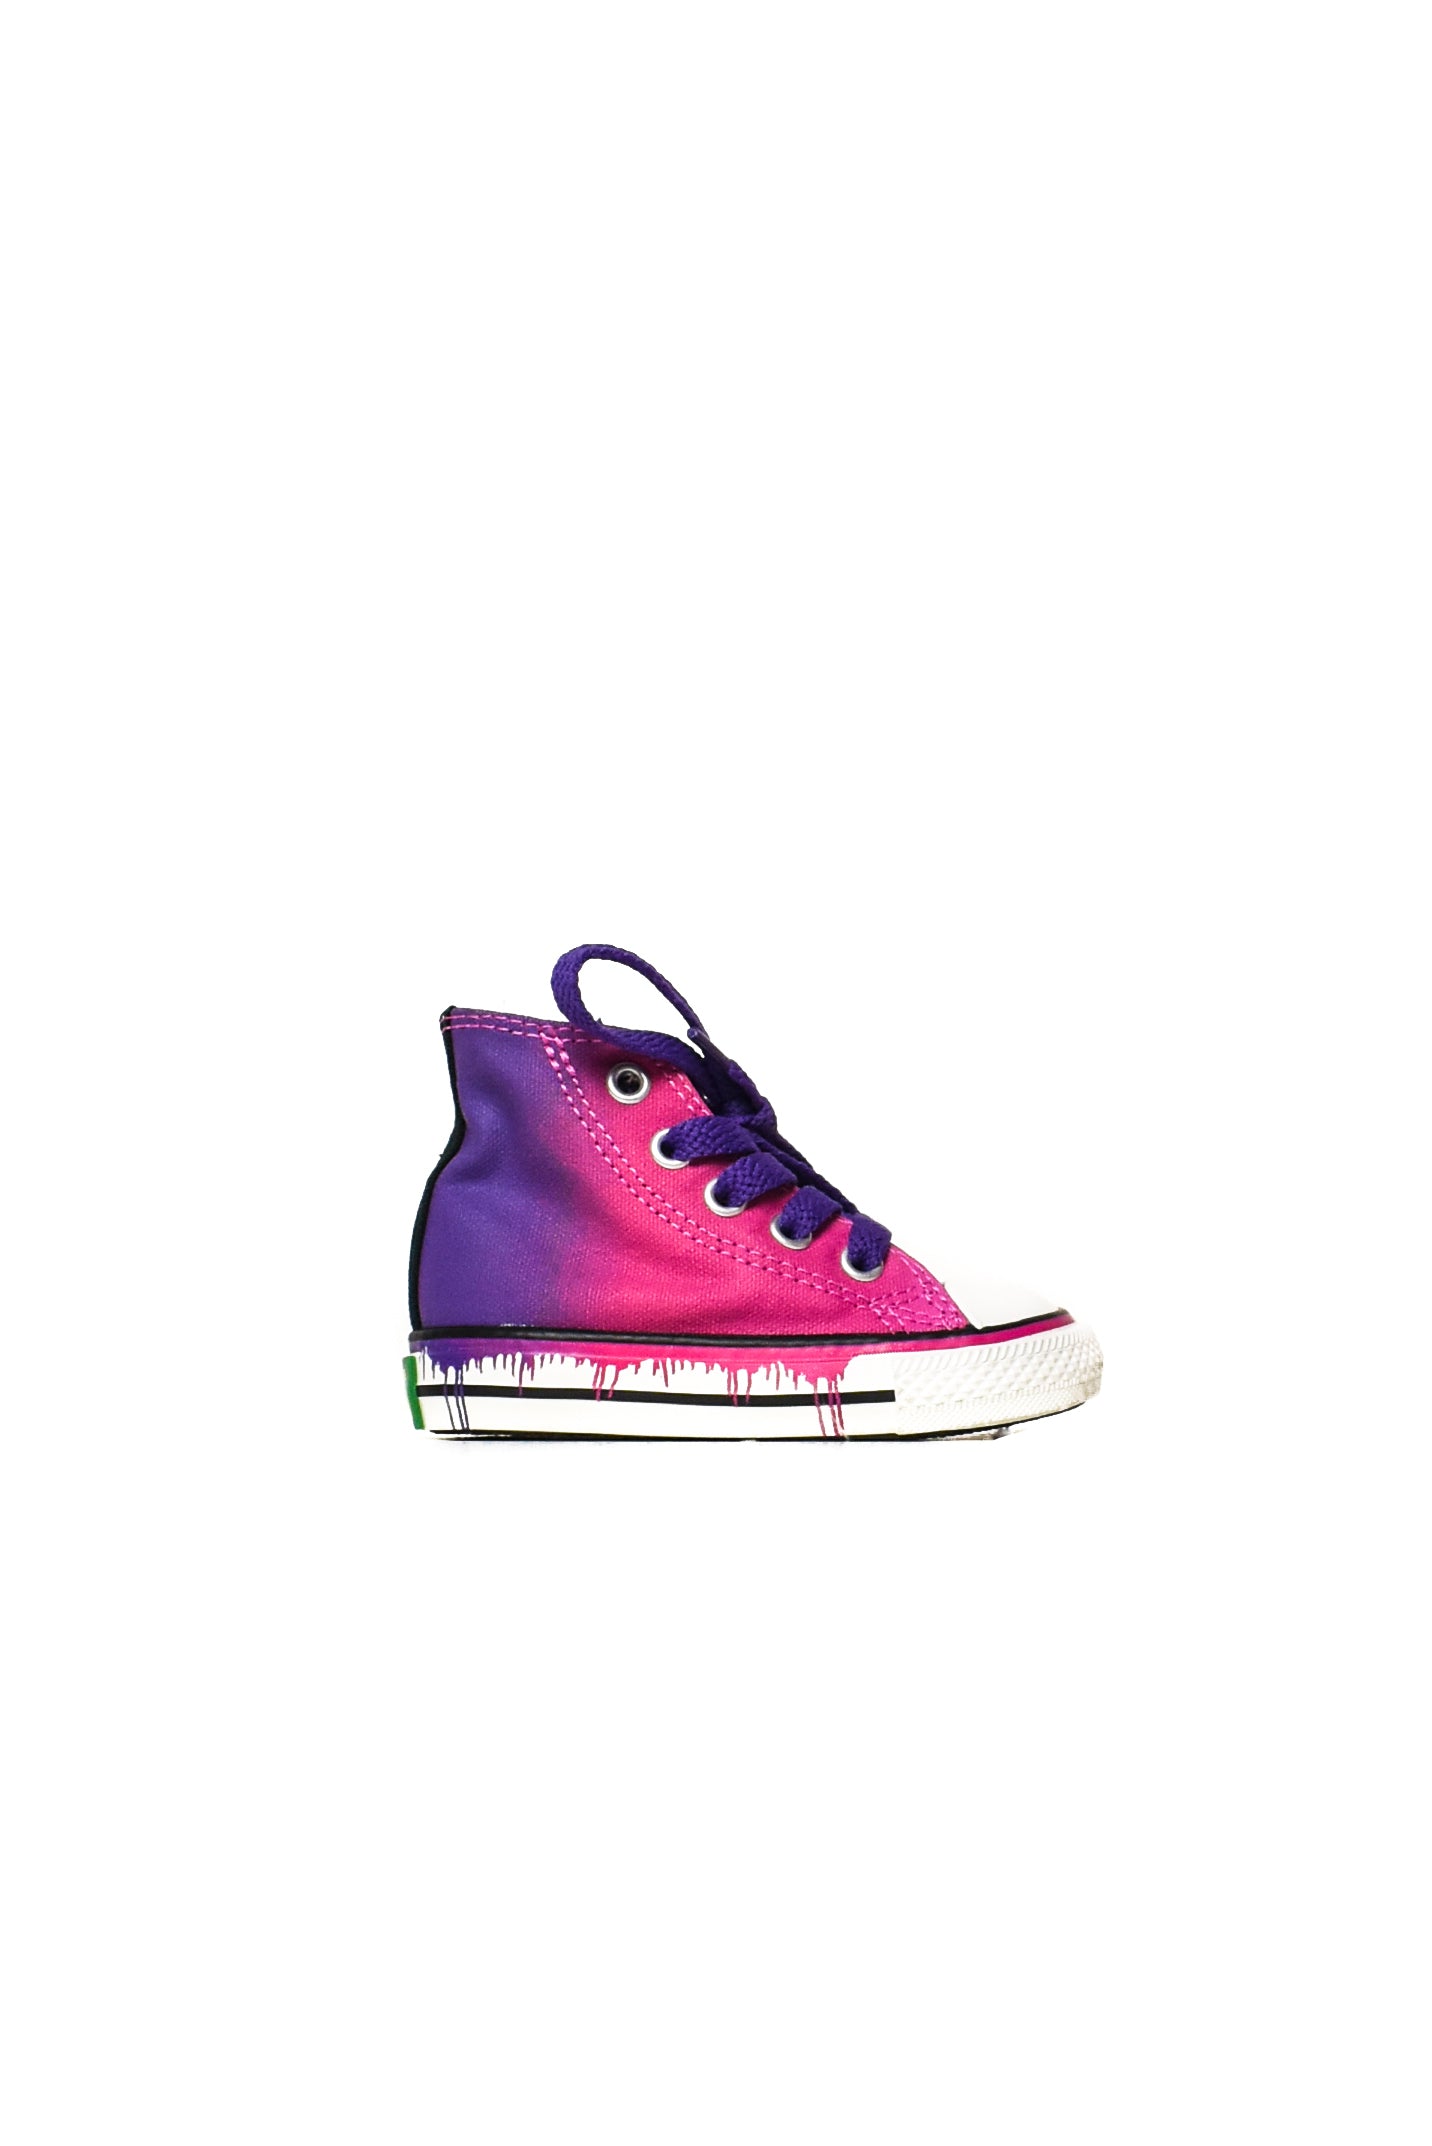 converse pink baby shoes